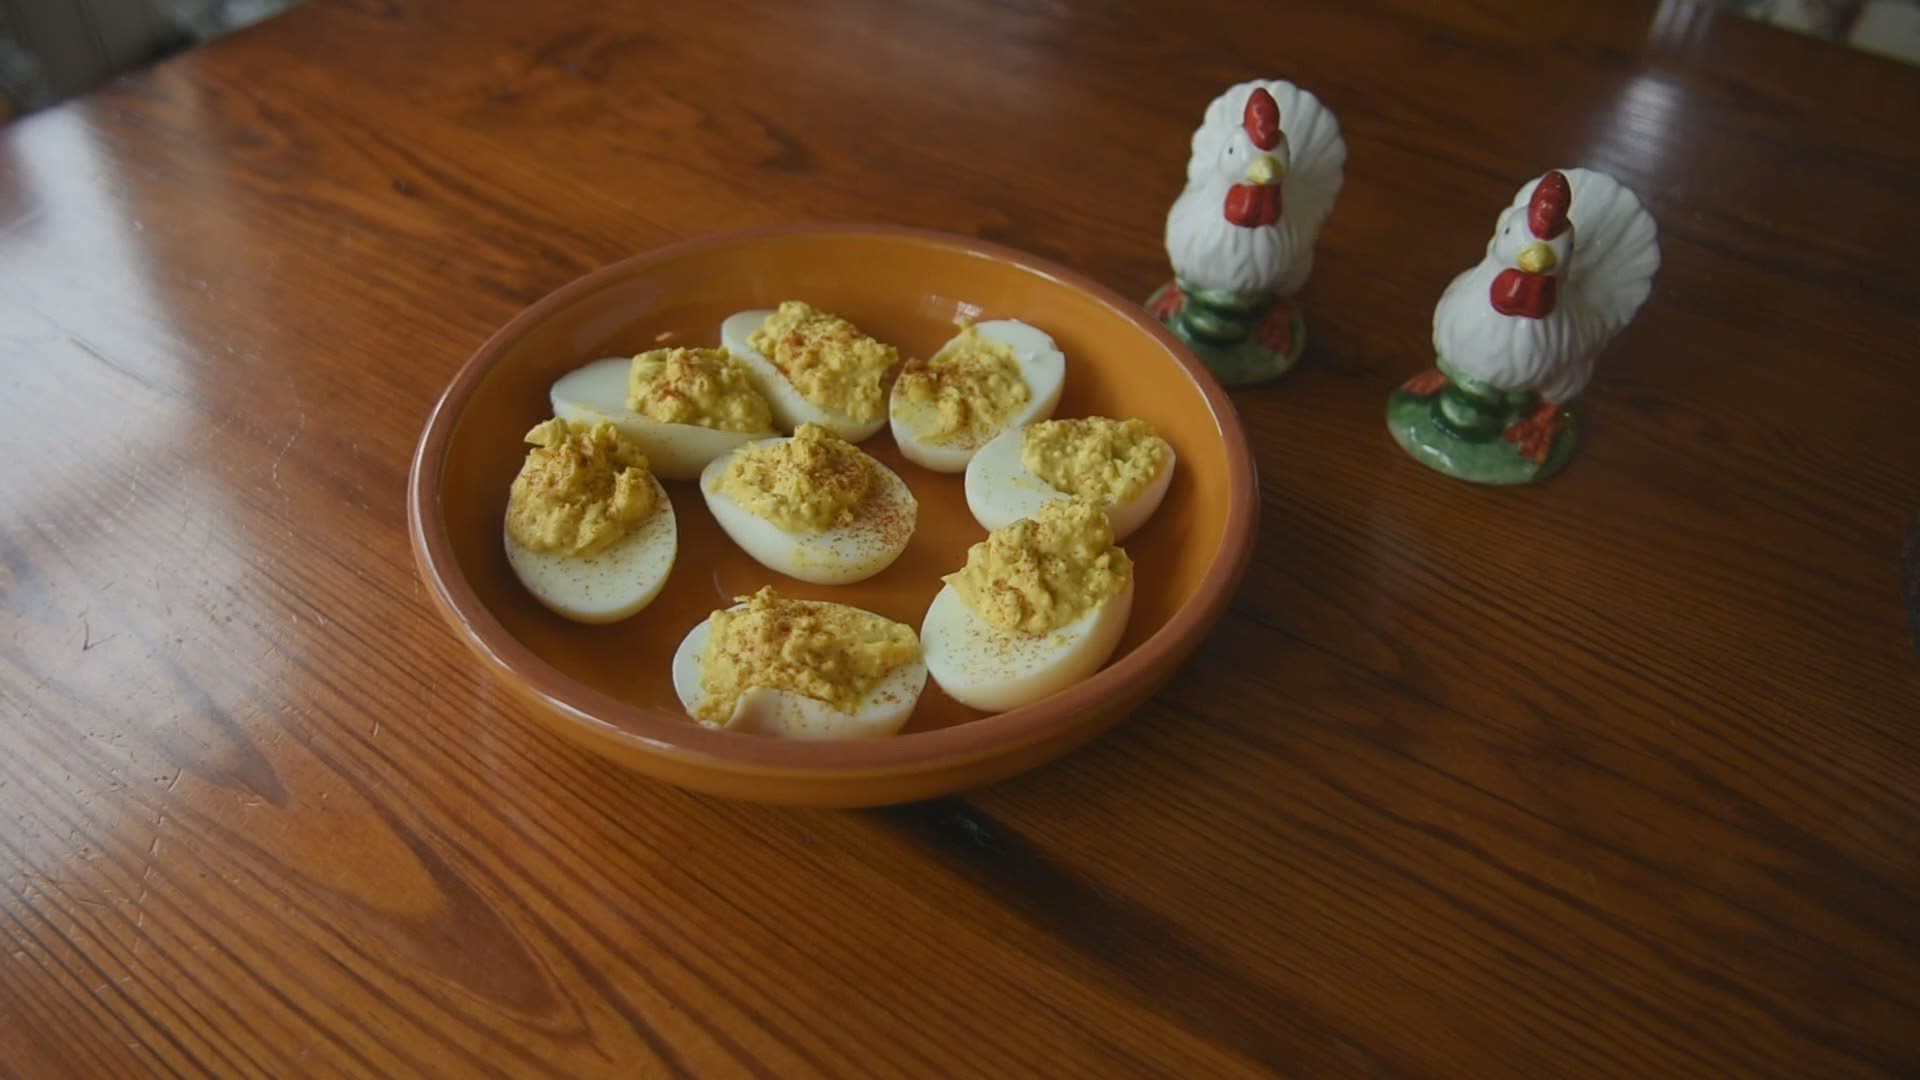 Show up with Deviled Eggs and you'll be the life of the party.